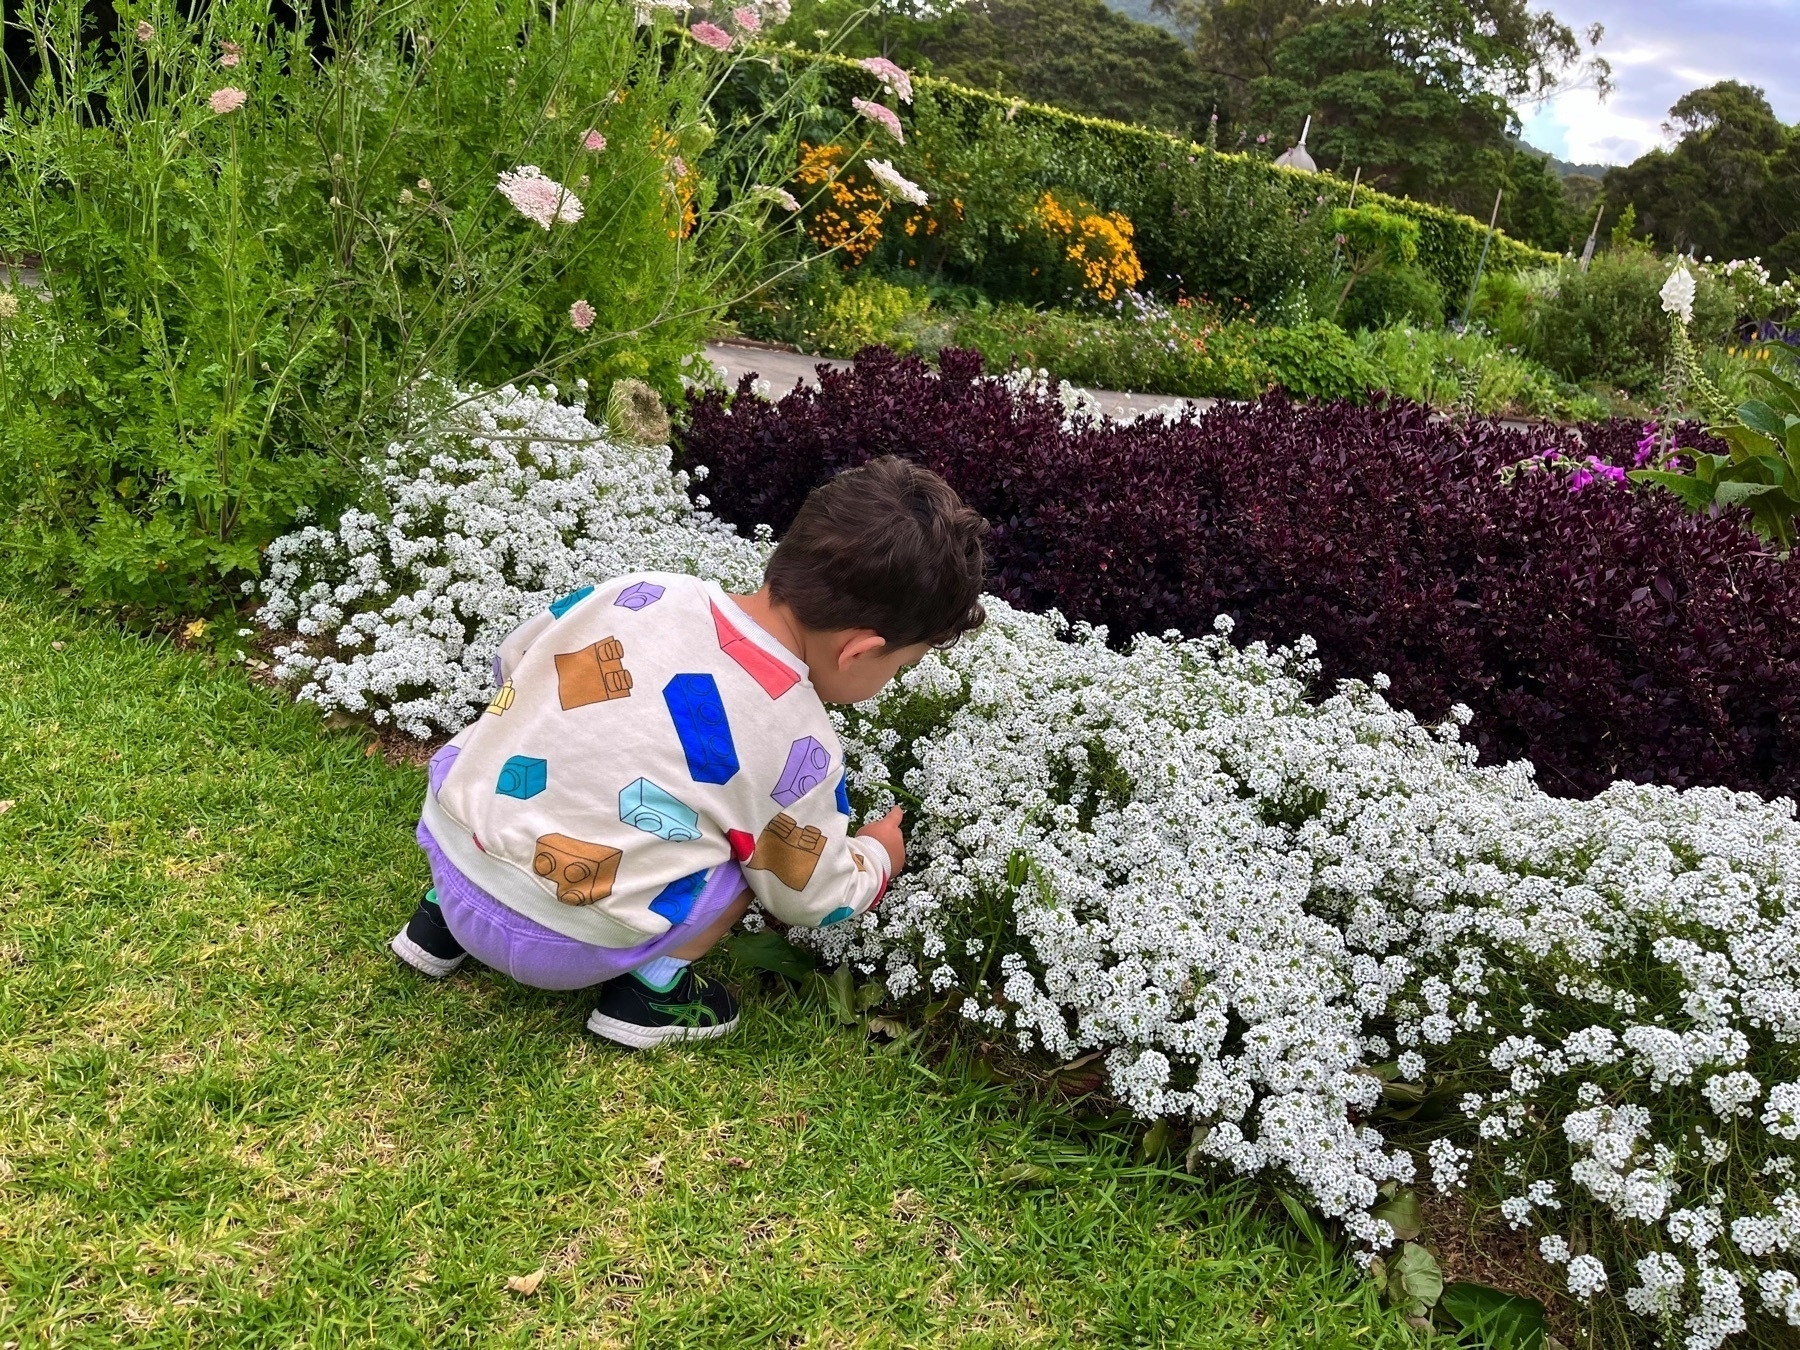 A toddler closely examines tiny white flowers in a garden.